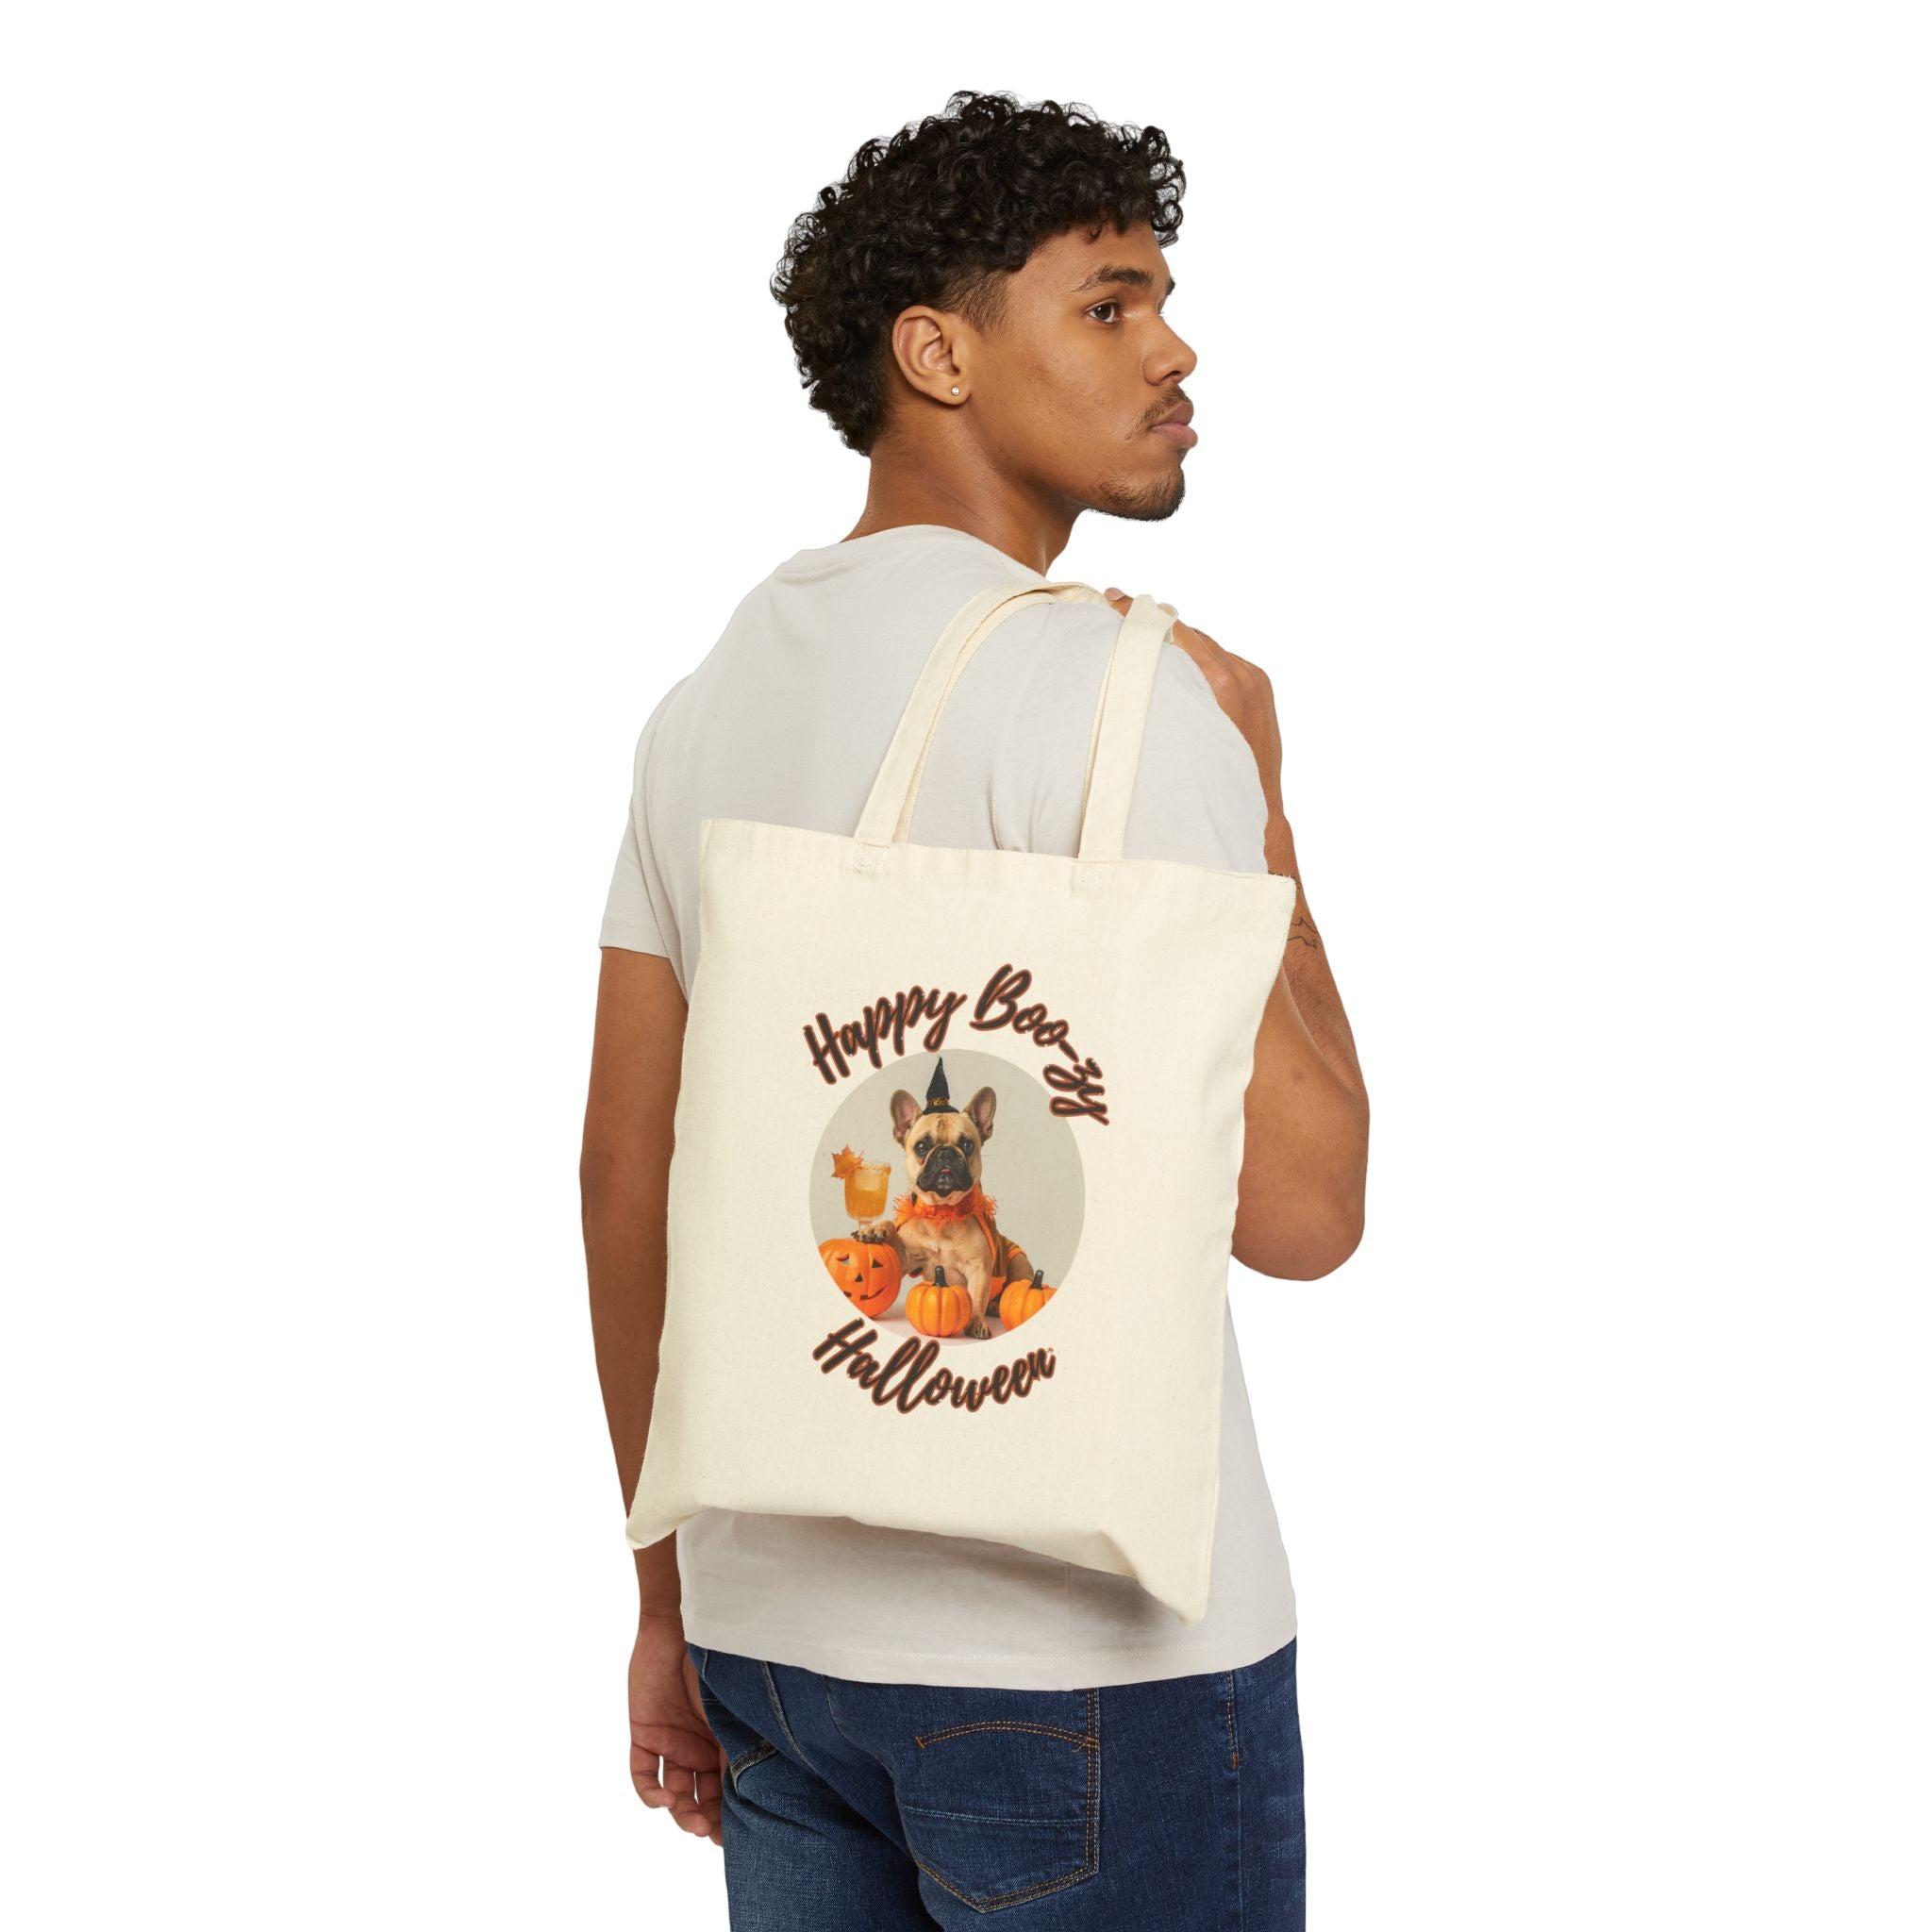 "Happy Boo-zy Halloween" Trick or Treat Canvas Tote Bag (Tan/French)